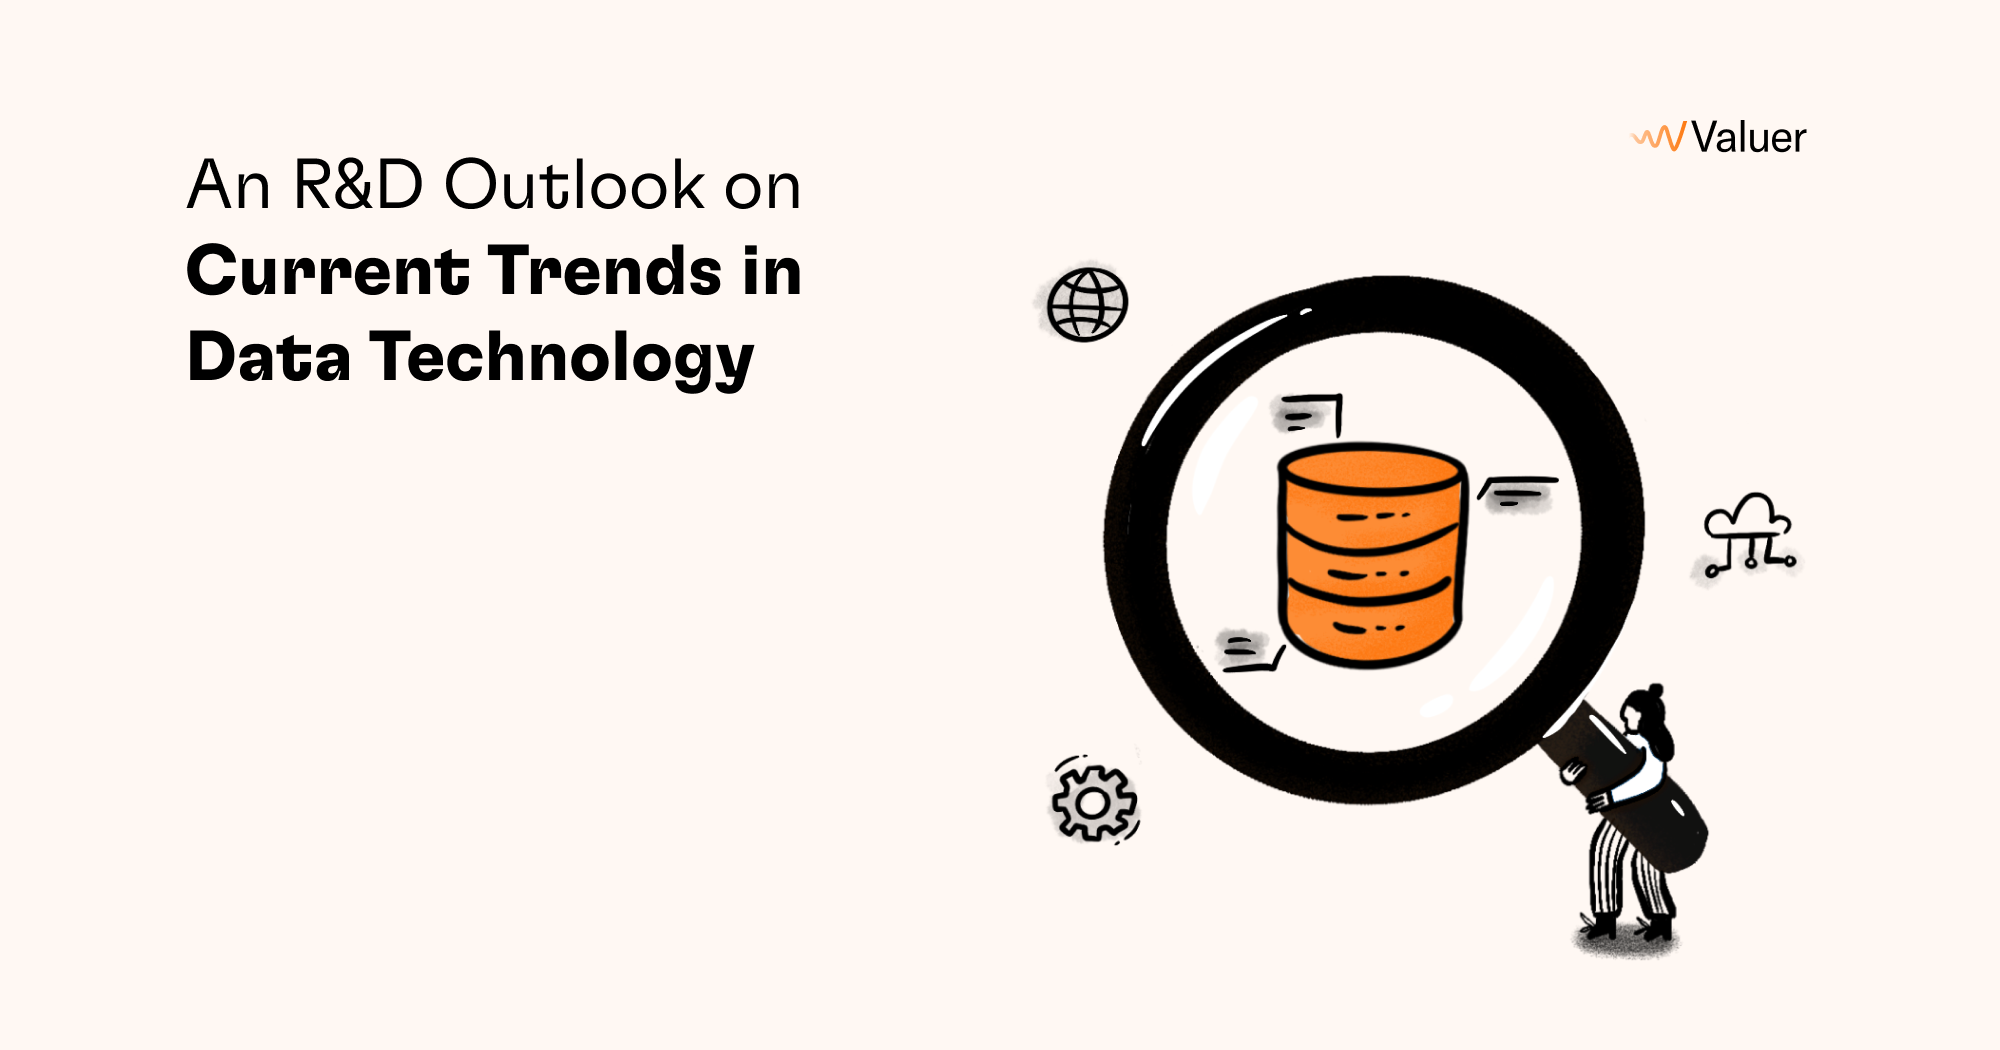 An R&D Outlook on Current Trends in Data Technology